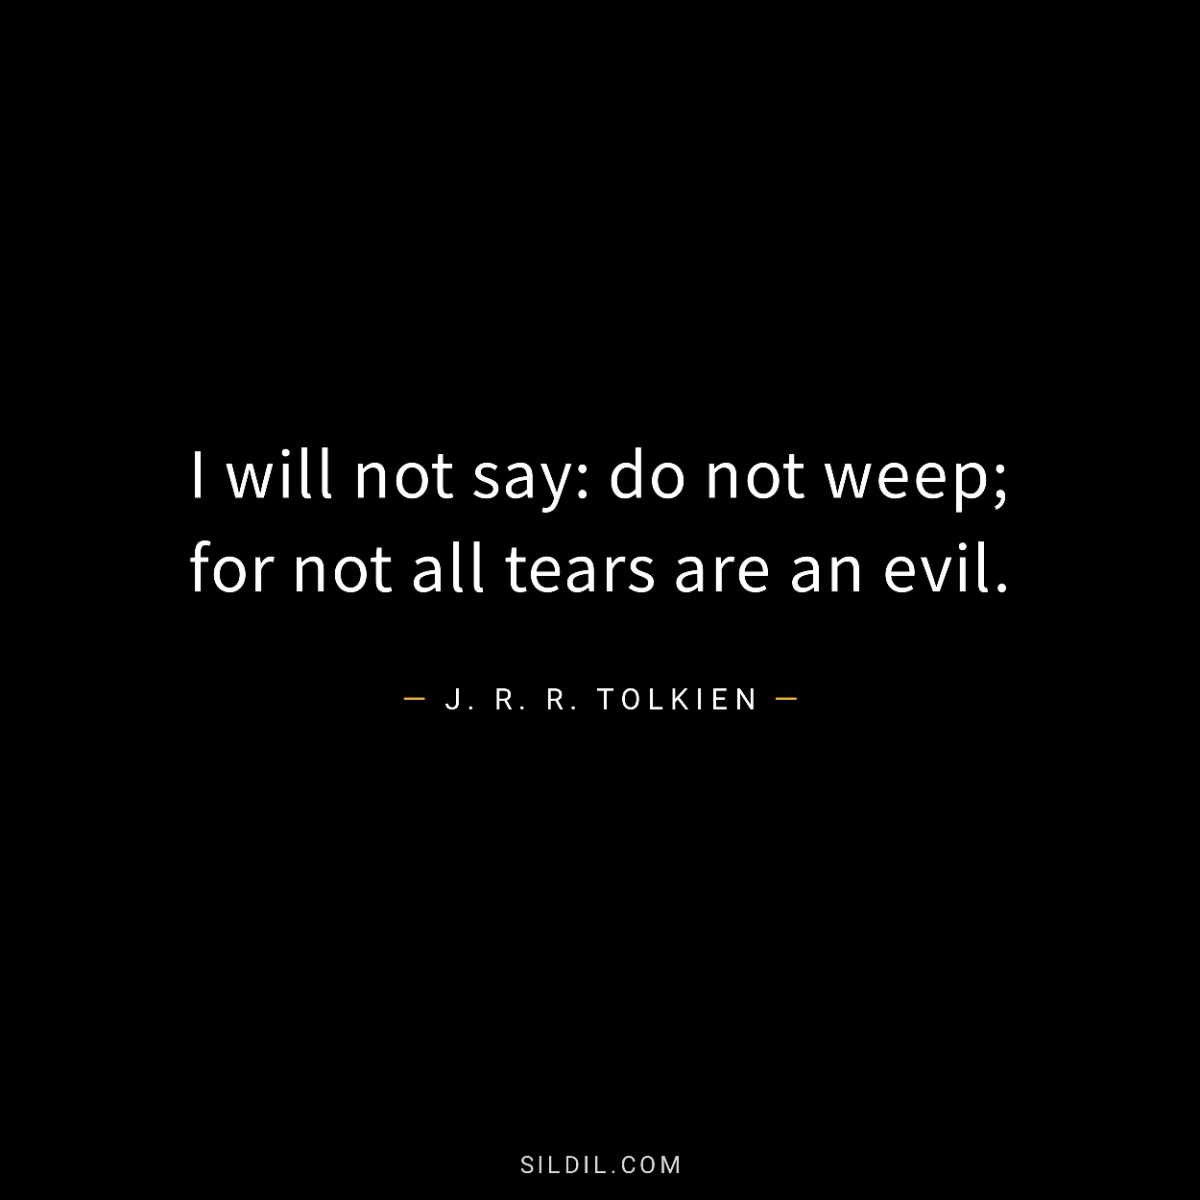 I will not say: do not weep; for not all tears are an evil.